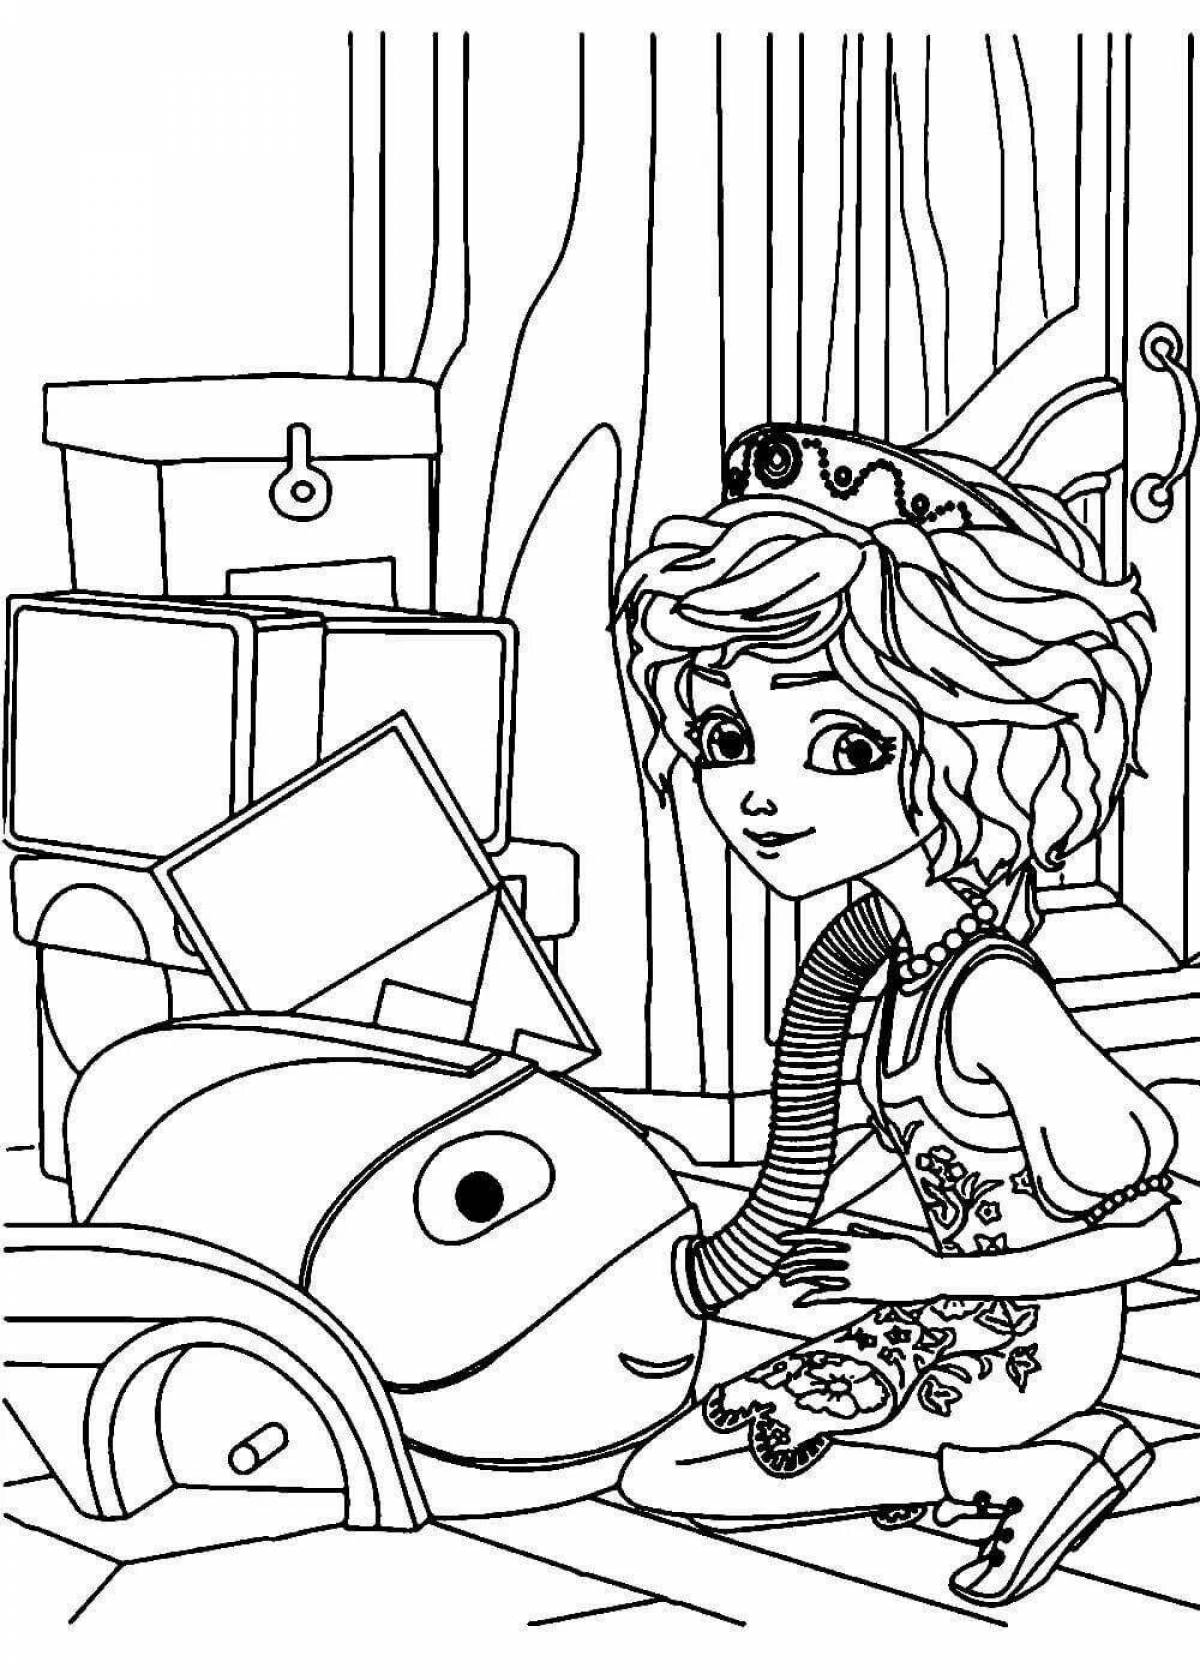 Amazing coloring pages of princesses all together